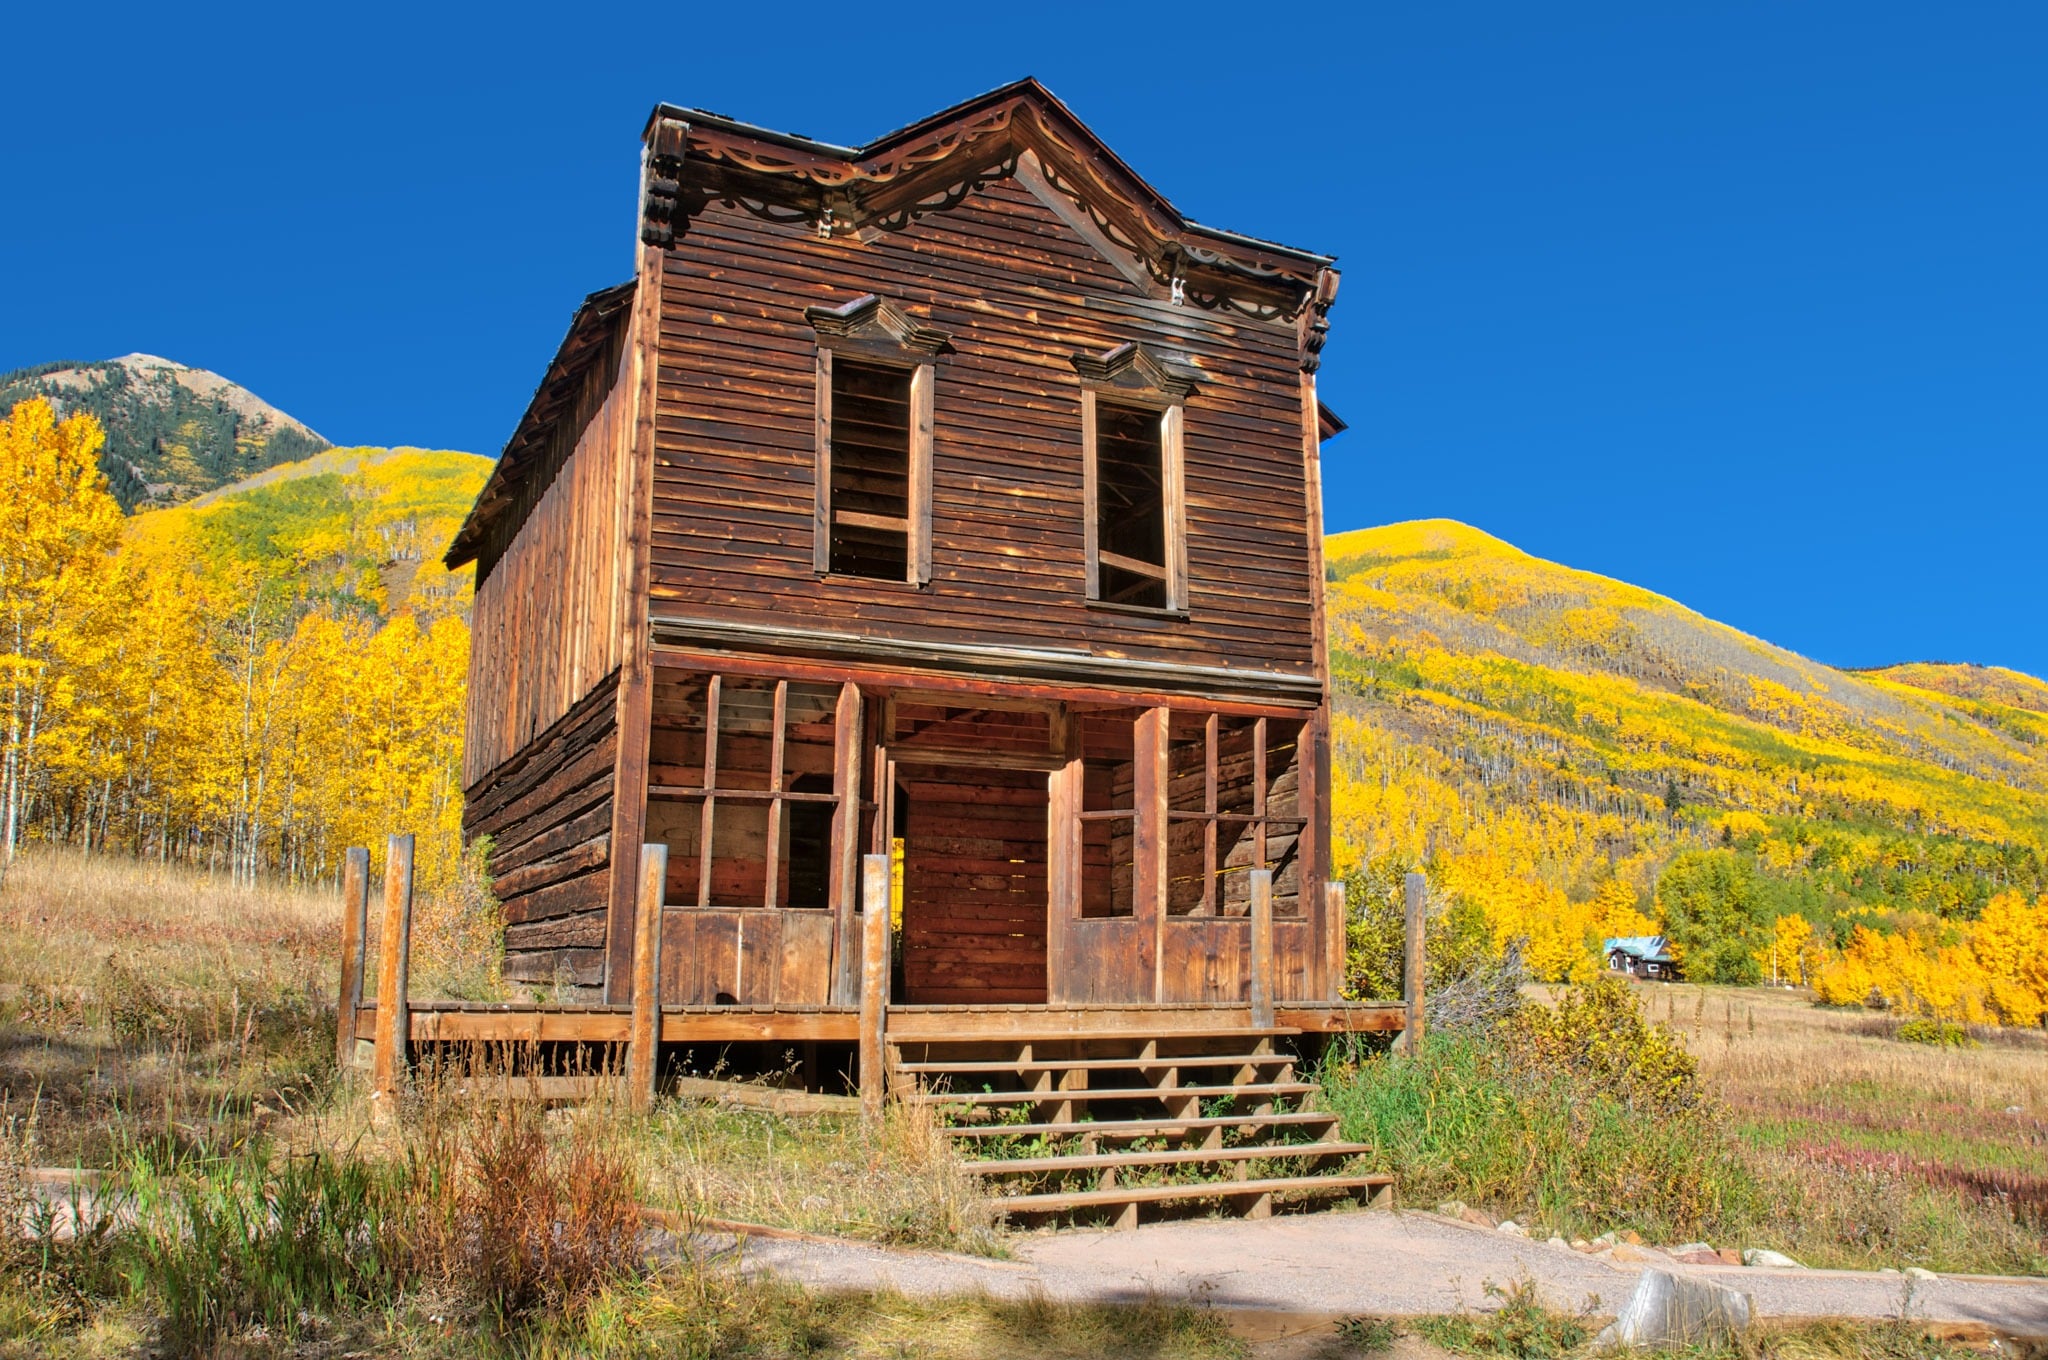 The remains of an old hotel with gingerbread along the roofline is on a street in Ashcroft Ghost Town near Aspen, Colorado.